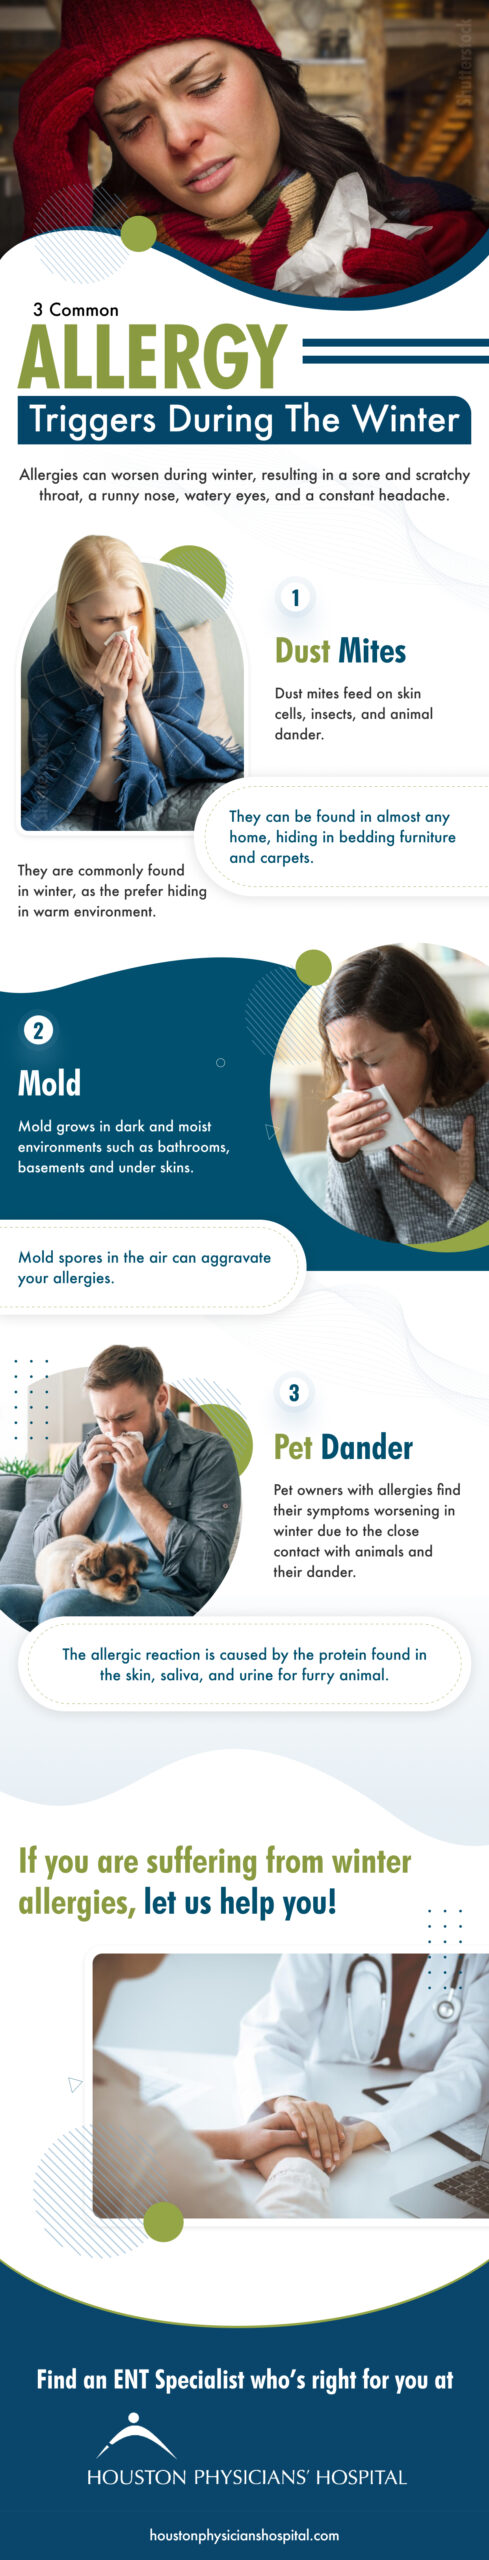 3 Common Allergy Triggers During the Winter Infograph